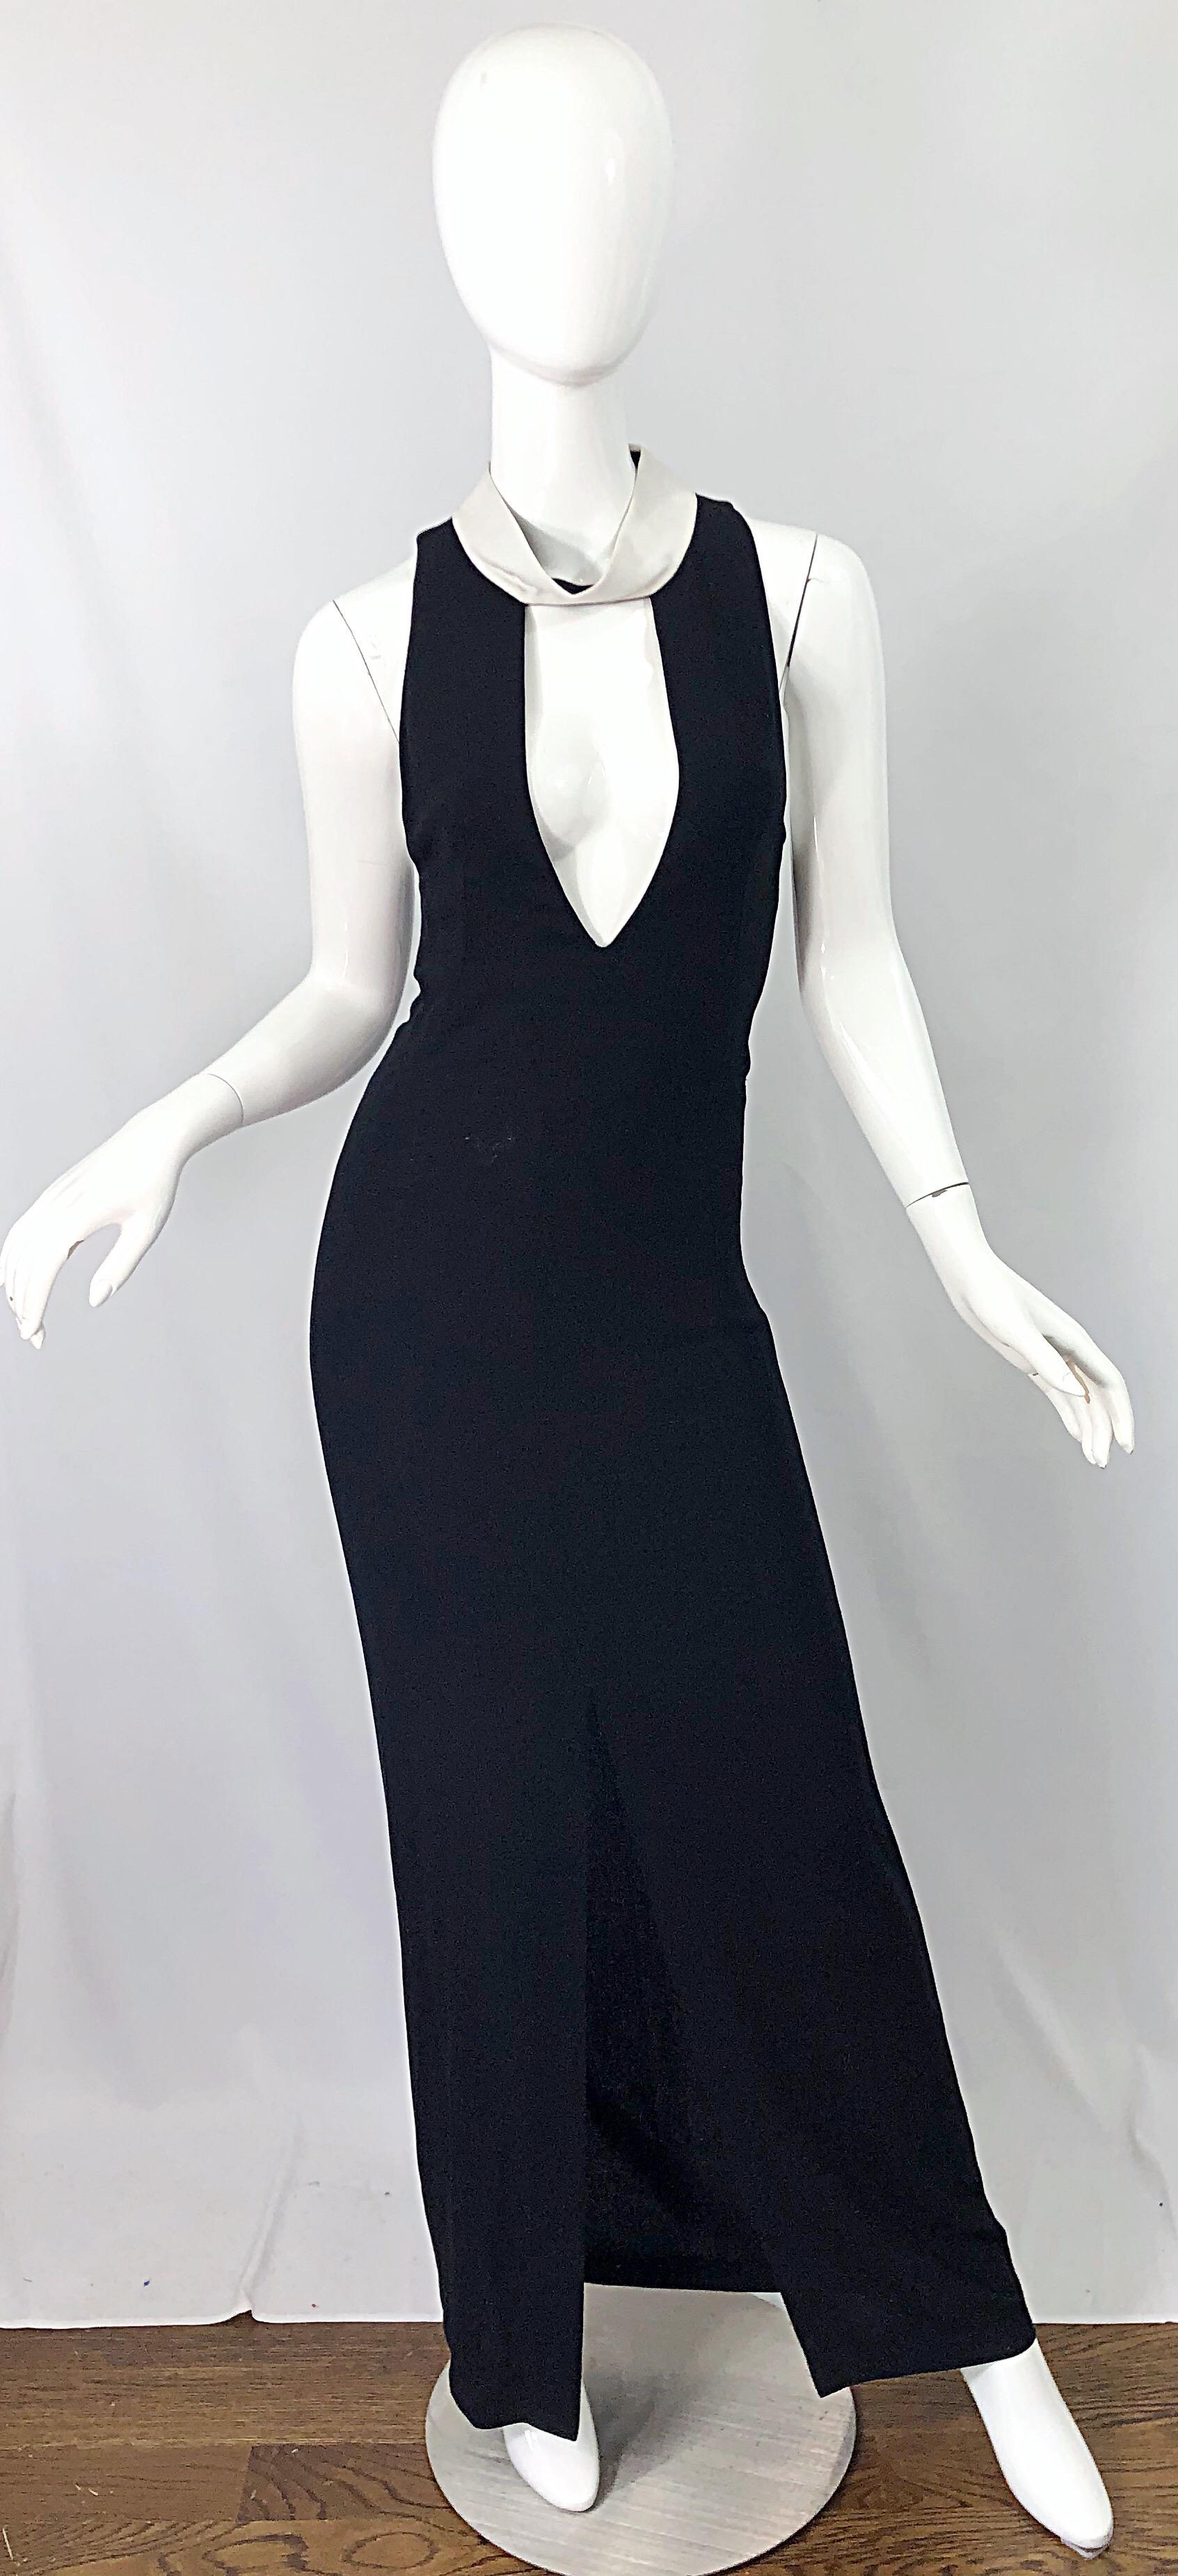 Yves Saint Laurent Tom Ford Black White Plunging Cleavage Cut Out Gown Dress For Sale 4